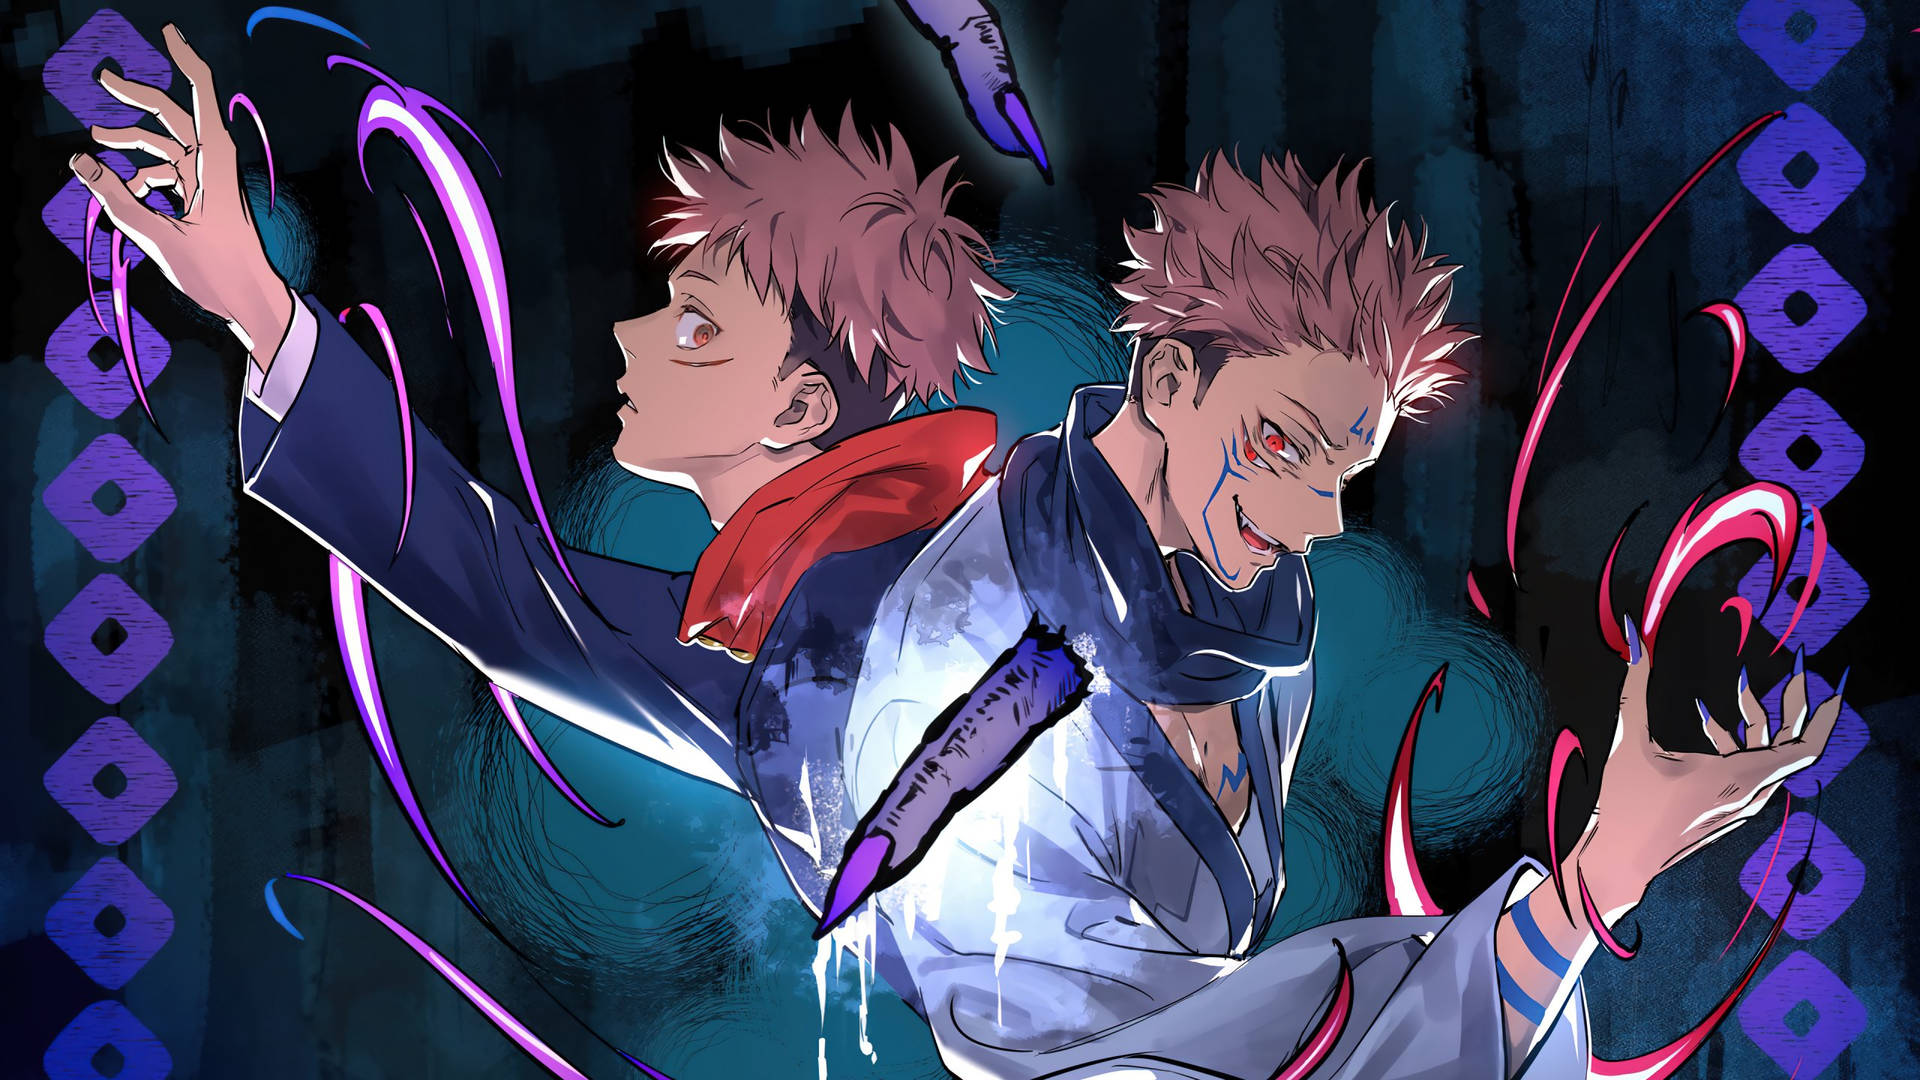 Jujutsu Kaisen - the modern day anime that has been captivating viewers all across the world. Wallpaper